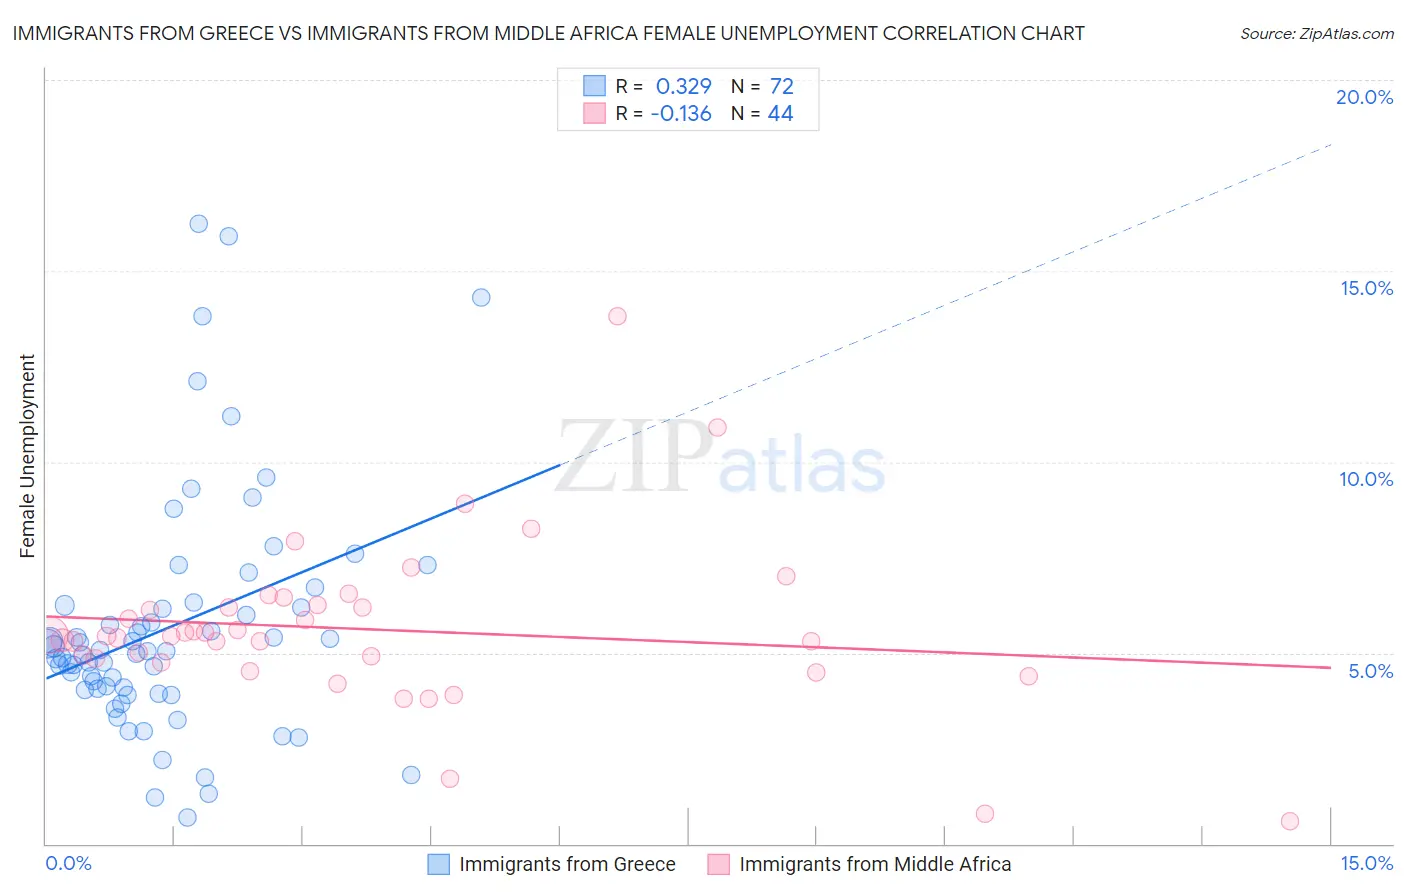 Immigrants from Greece vs Immigrants from Middle Africa Female Unemployment